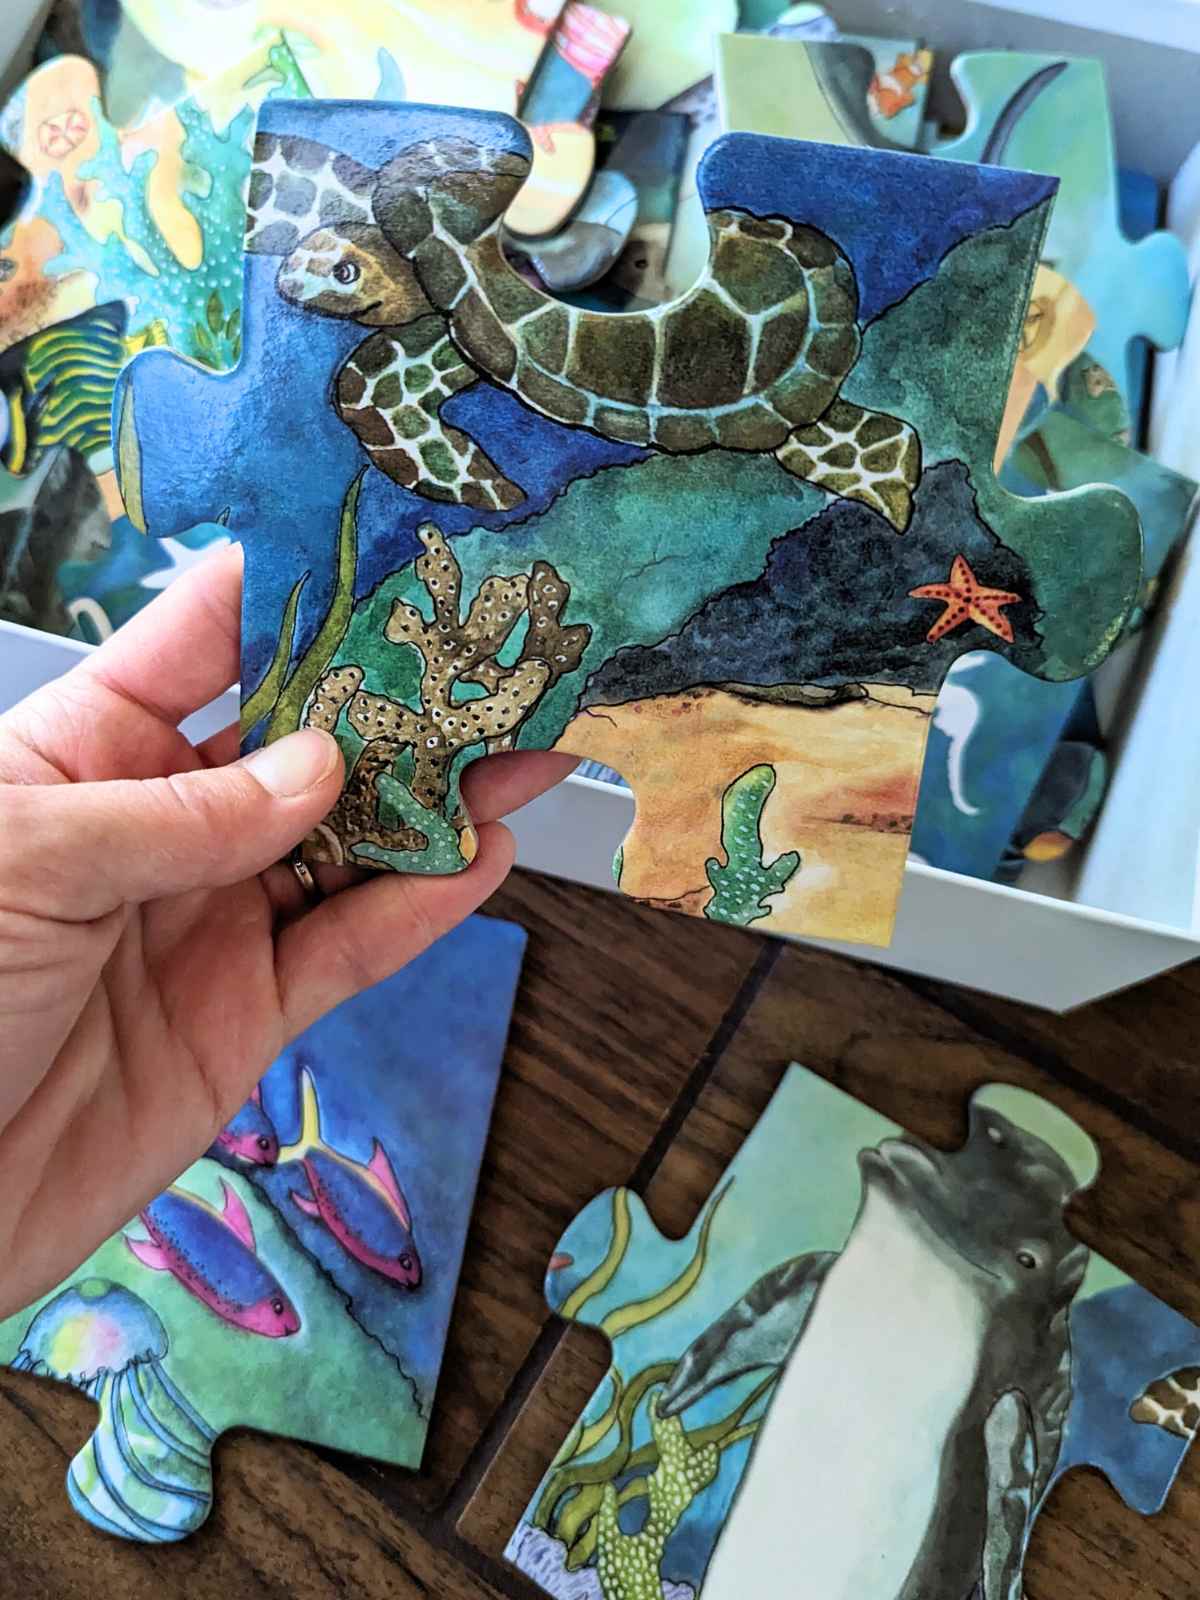 hand holding a large puzzle piece with a sea turtle, coral, and starfish. White box on the floor with puzzle pieces along with two ocean themed puzzle pieces on a wooden floor.